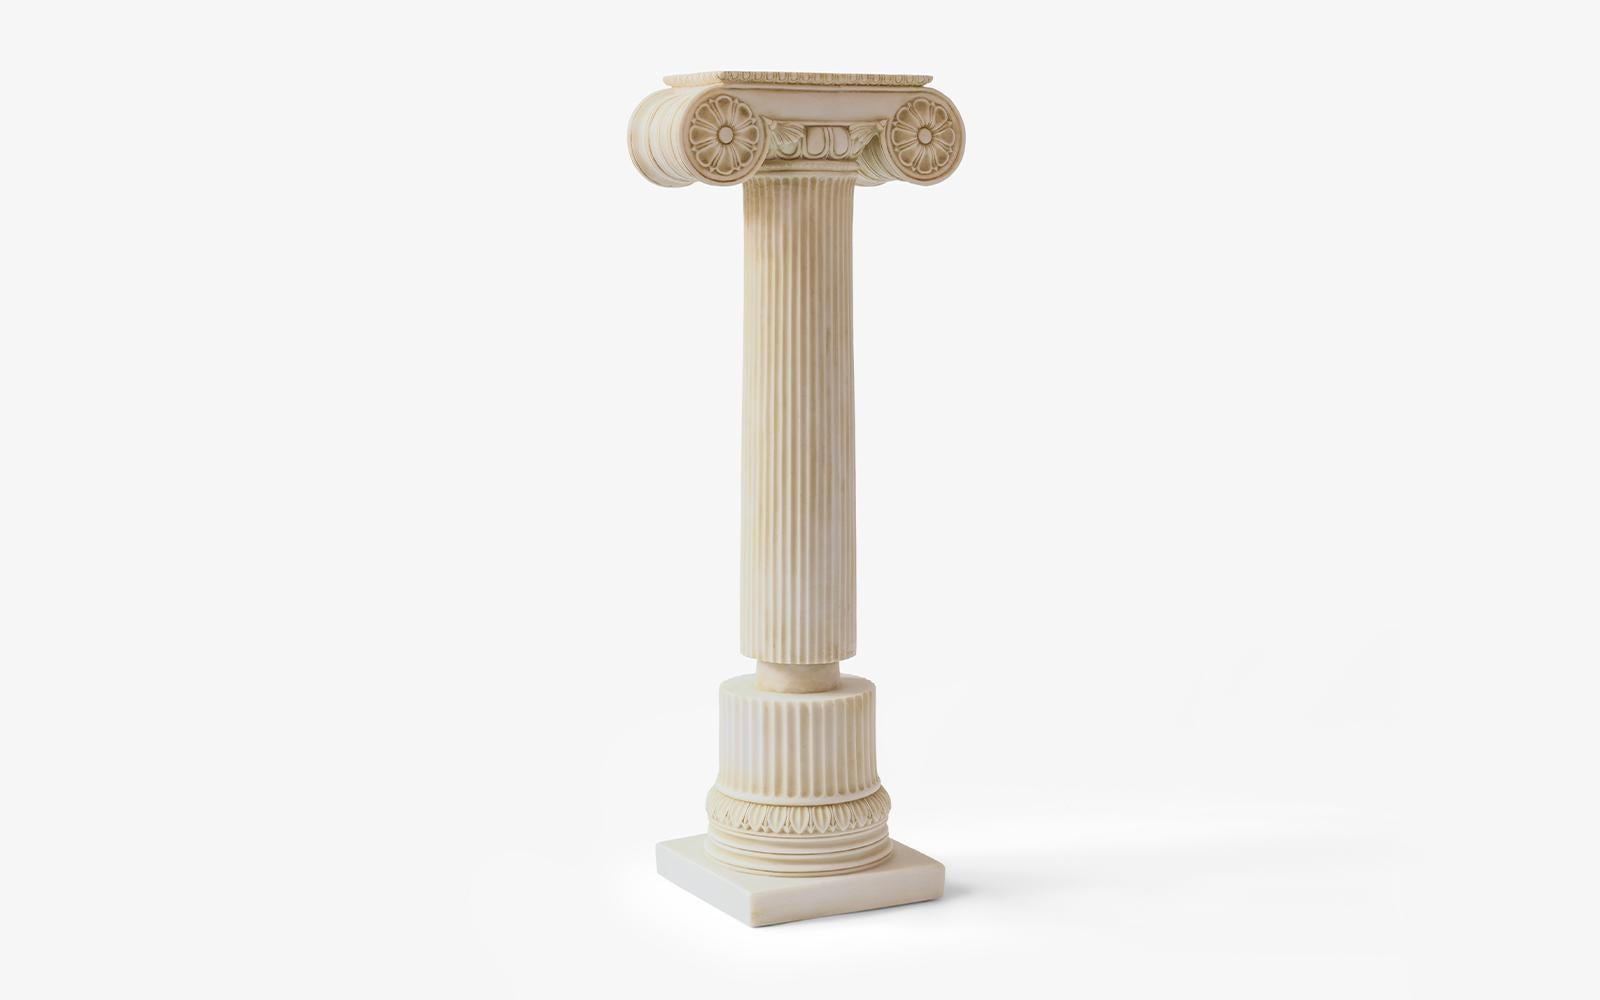 Weight: 7,5 kg
Ionic regular columns, born on the western and southern coasts of Anatolia, have a thin, long and elegant form.

agu's special selection brings the most important sculptures of world history to your living spaces with the best